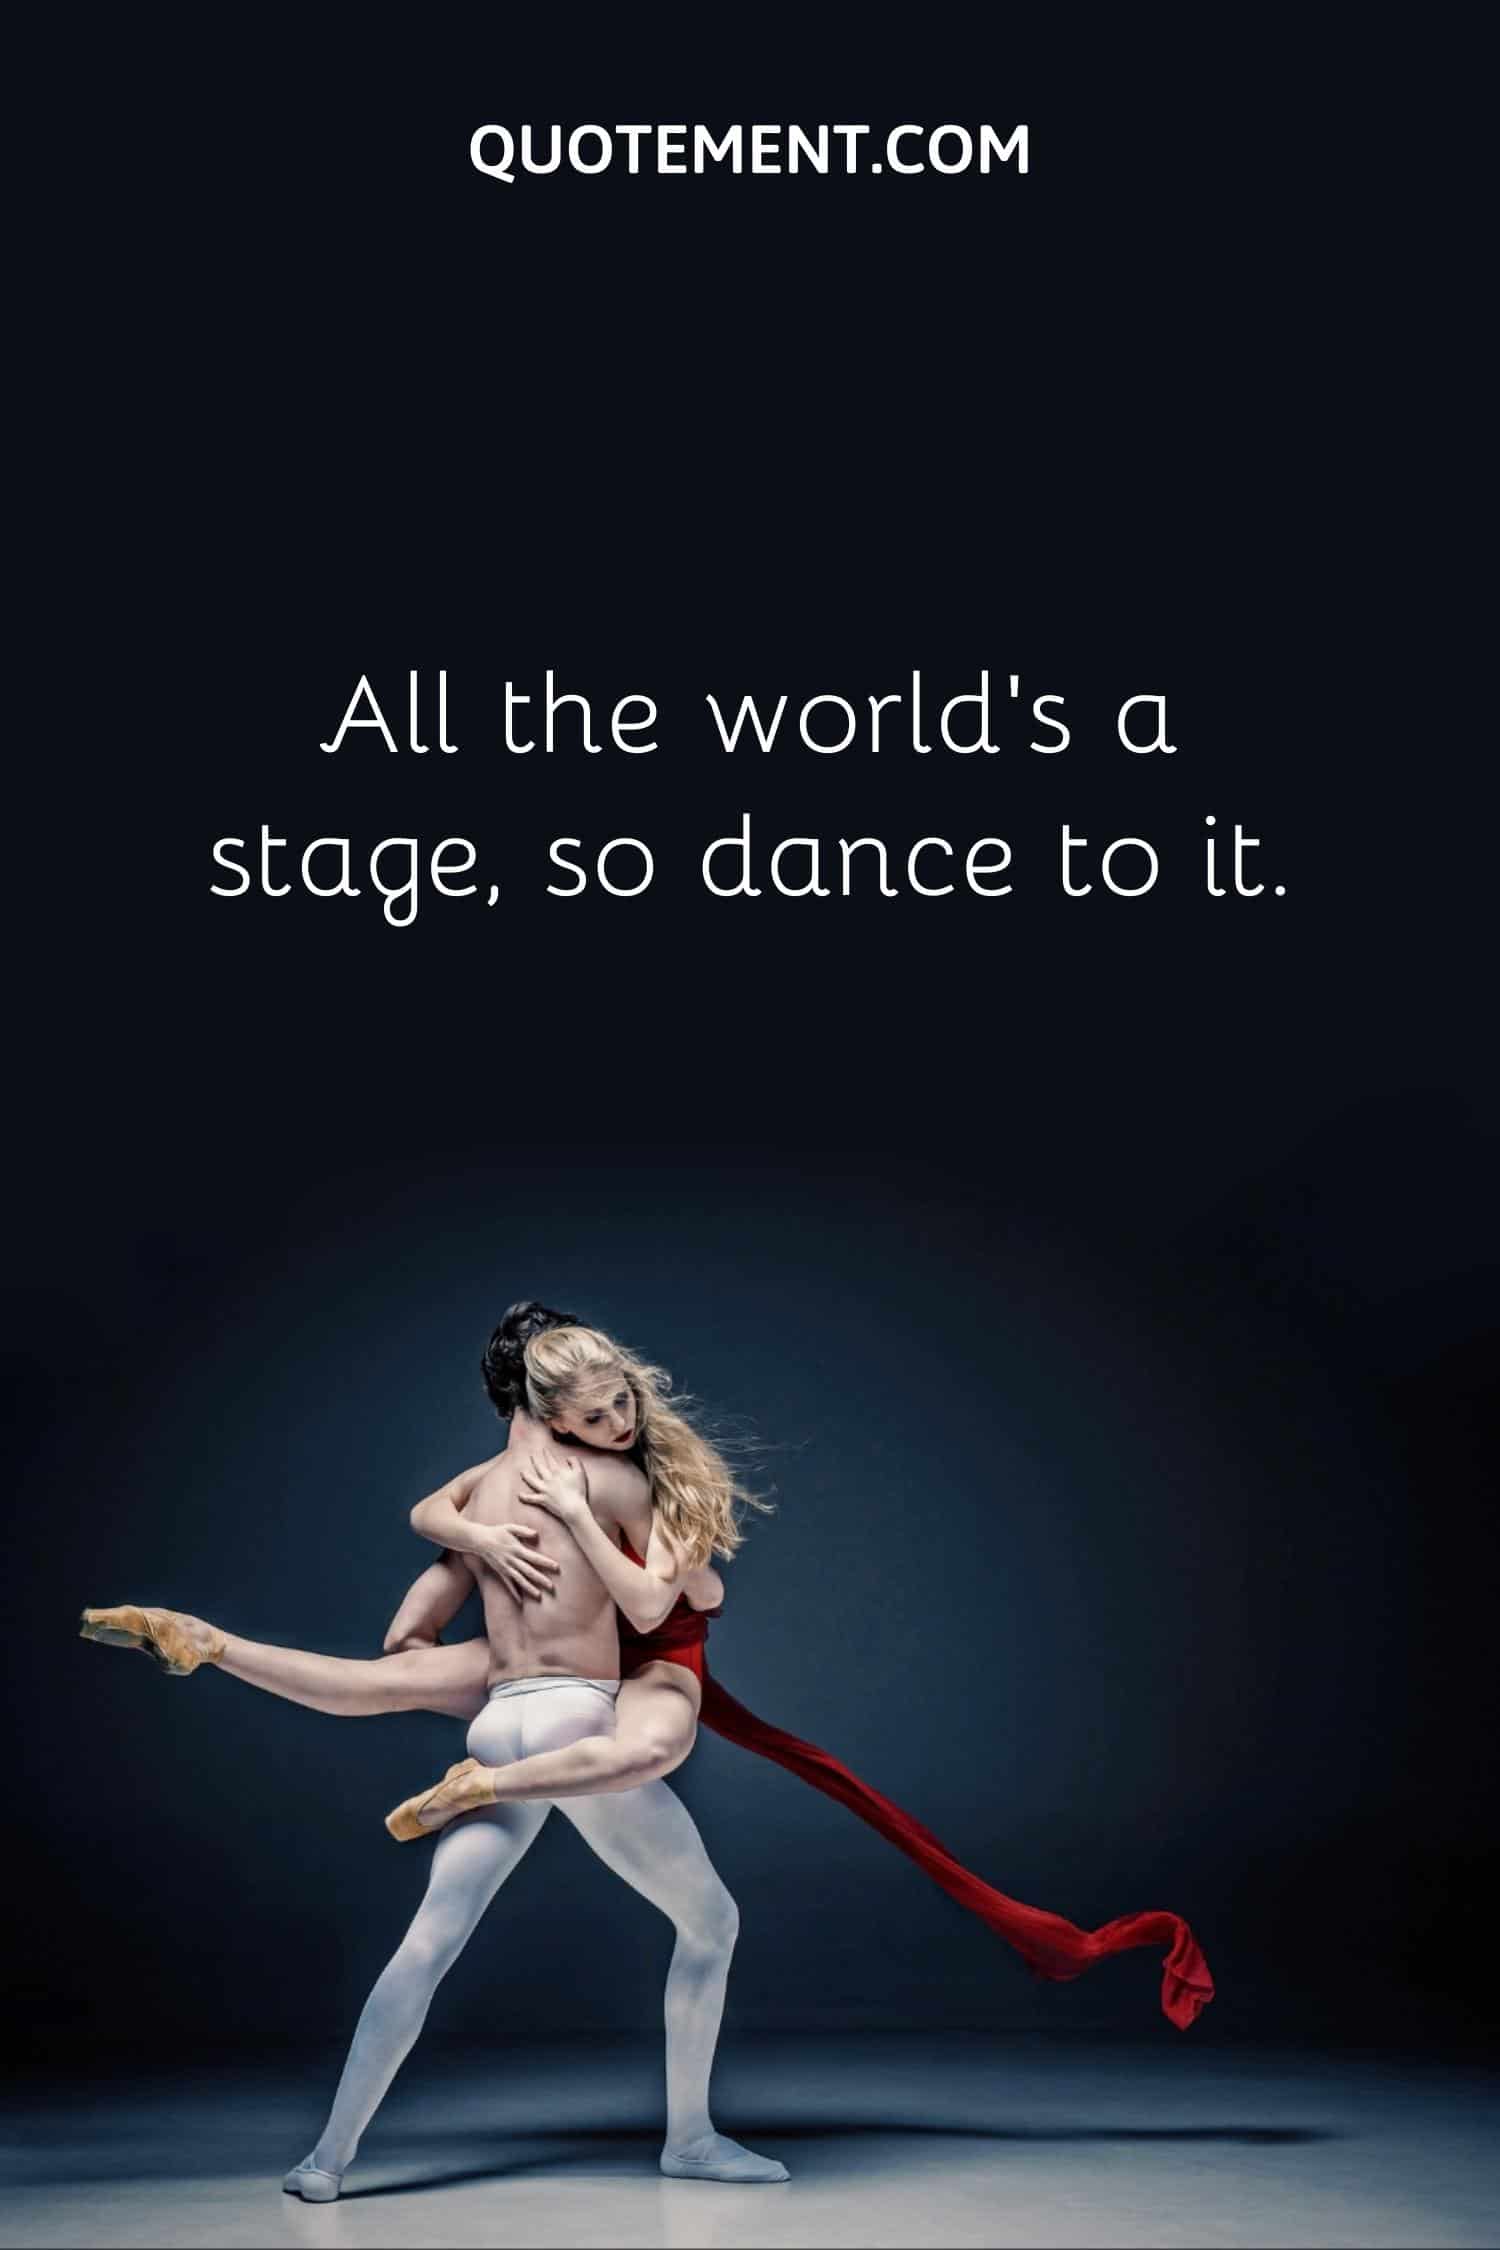 All the world’s a stage, so dance to it